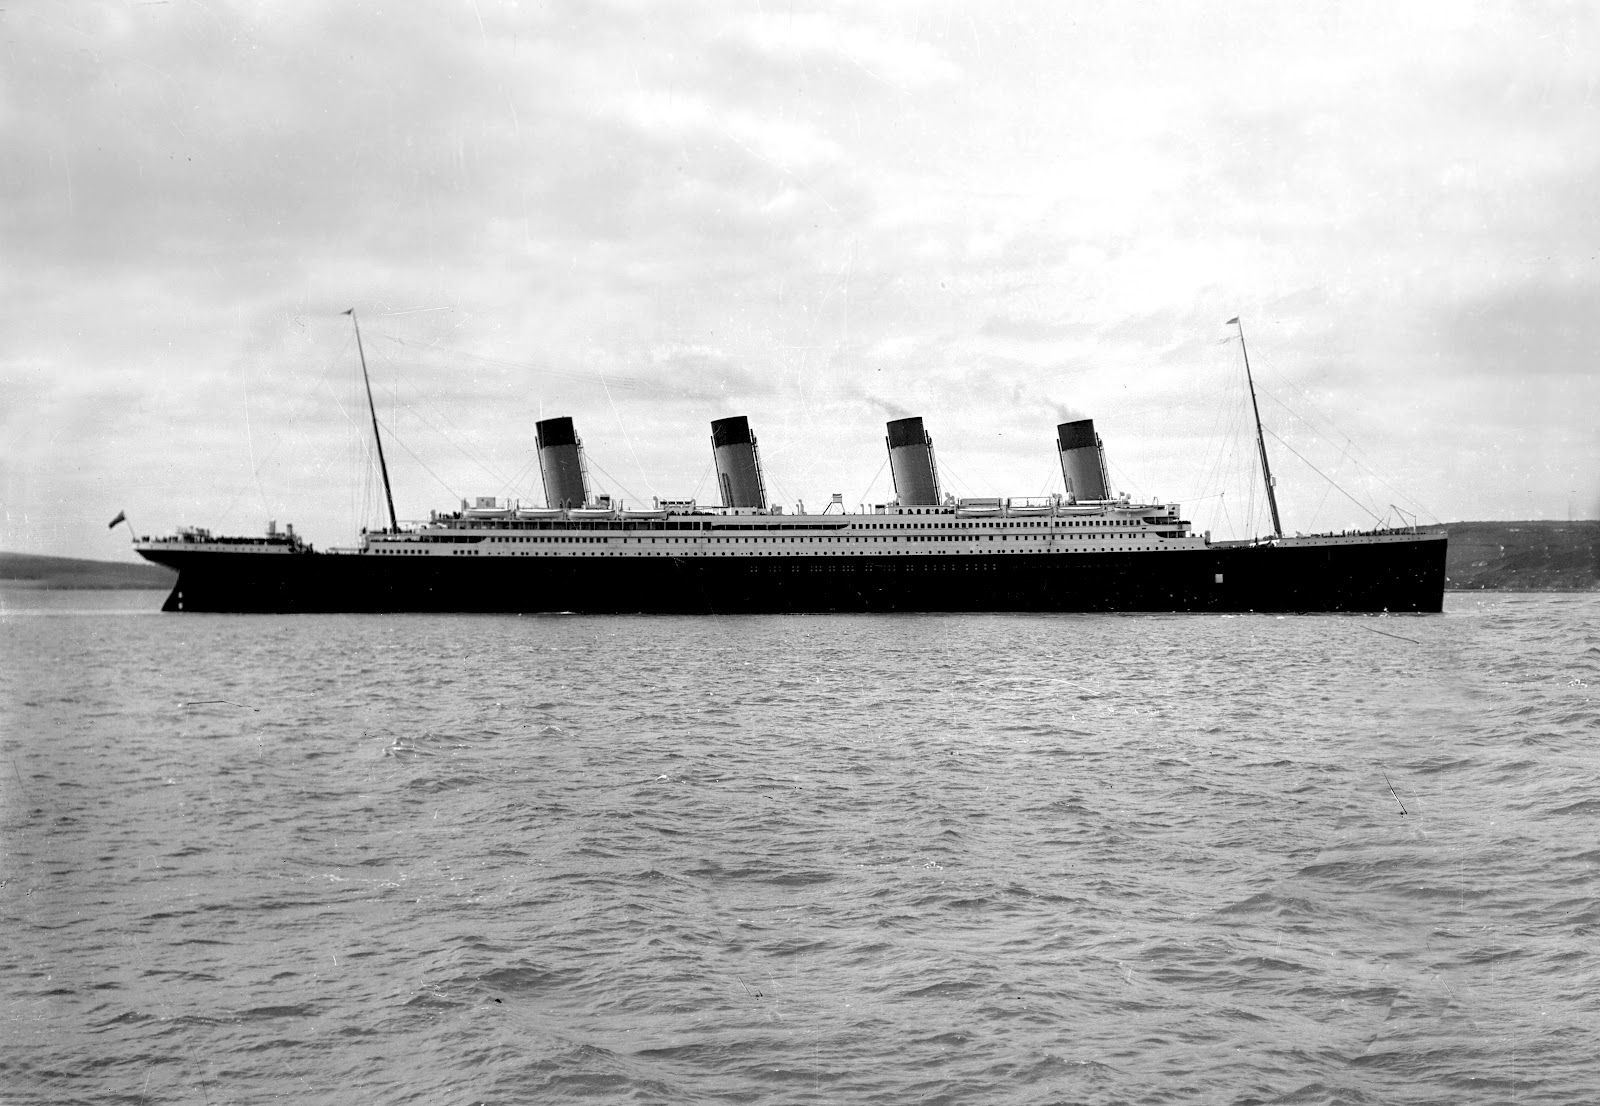 RMS Titanic from the starboard side, April 1912